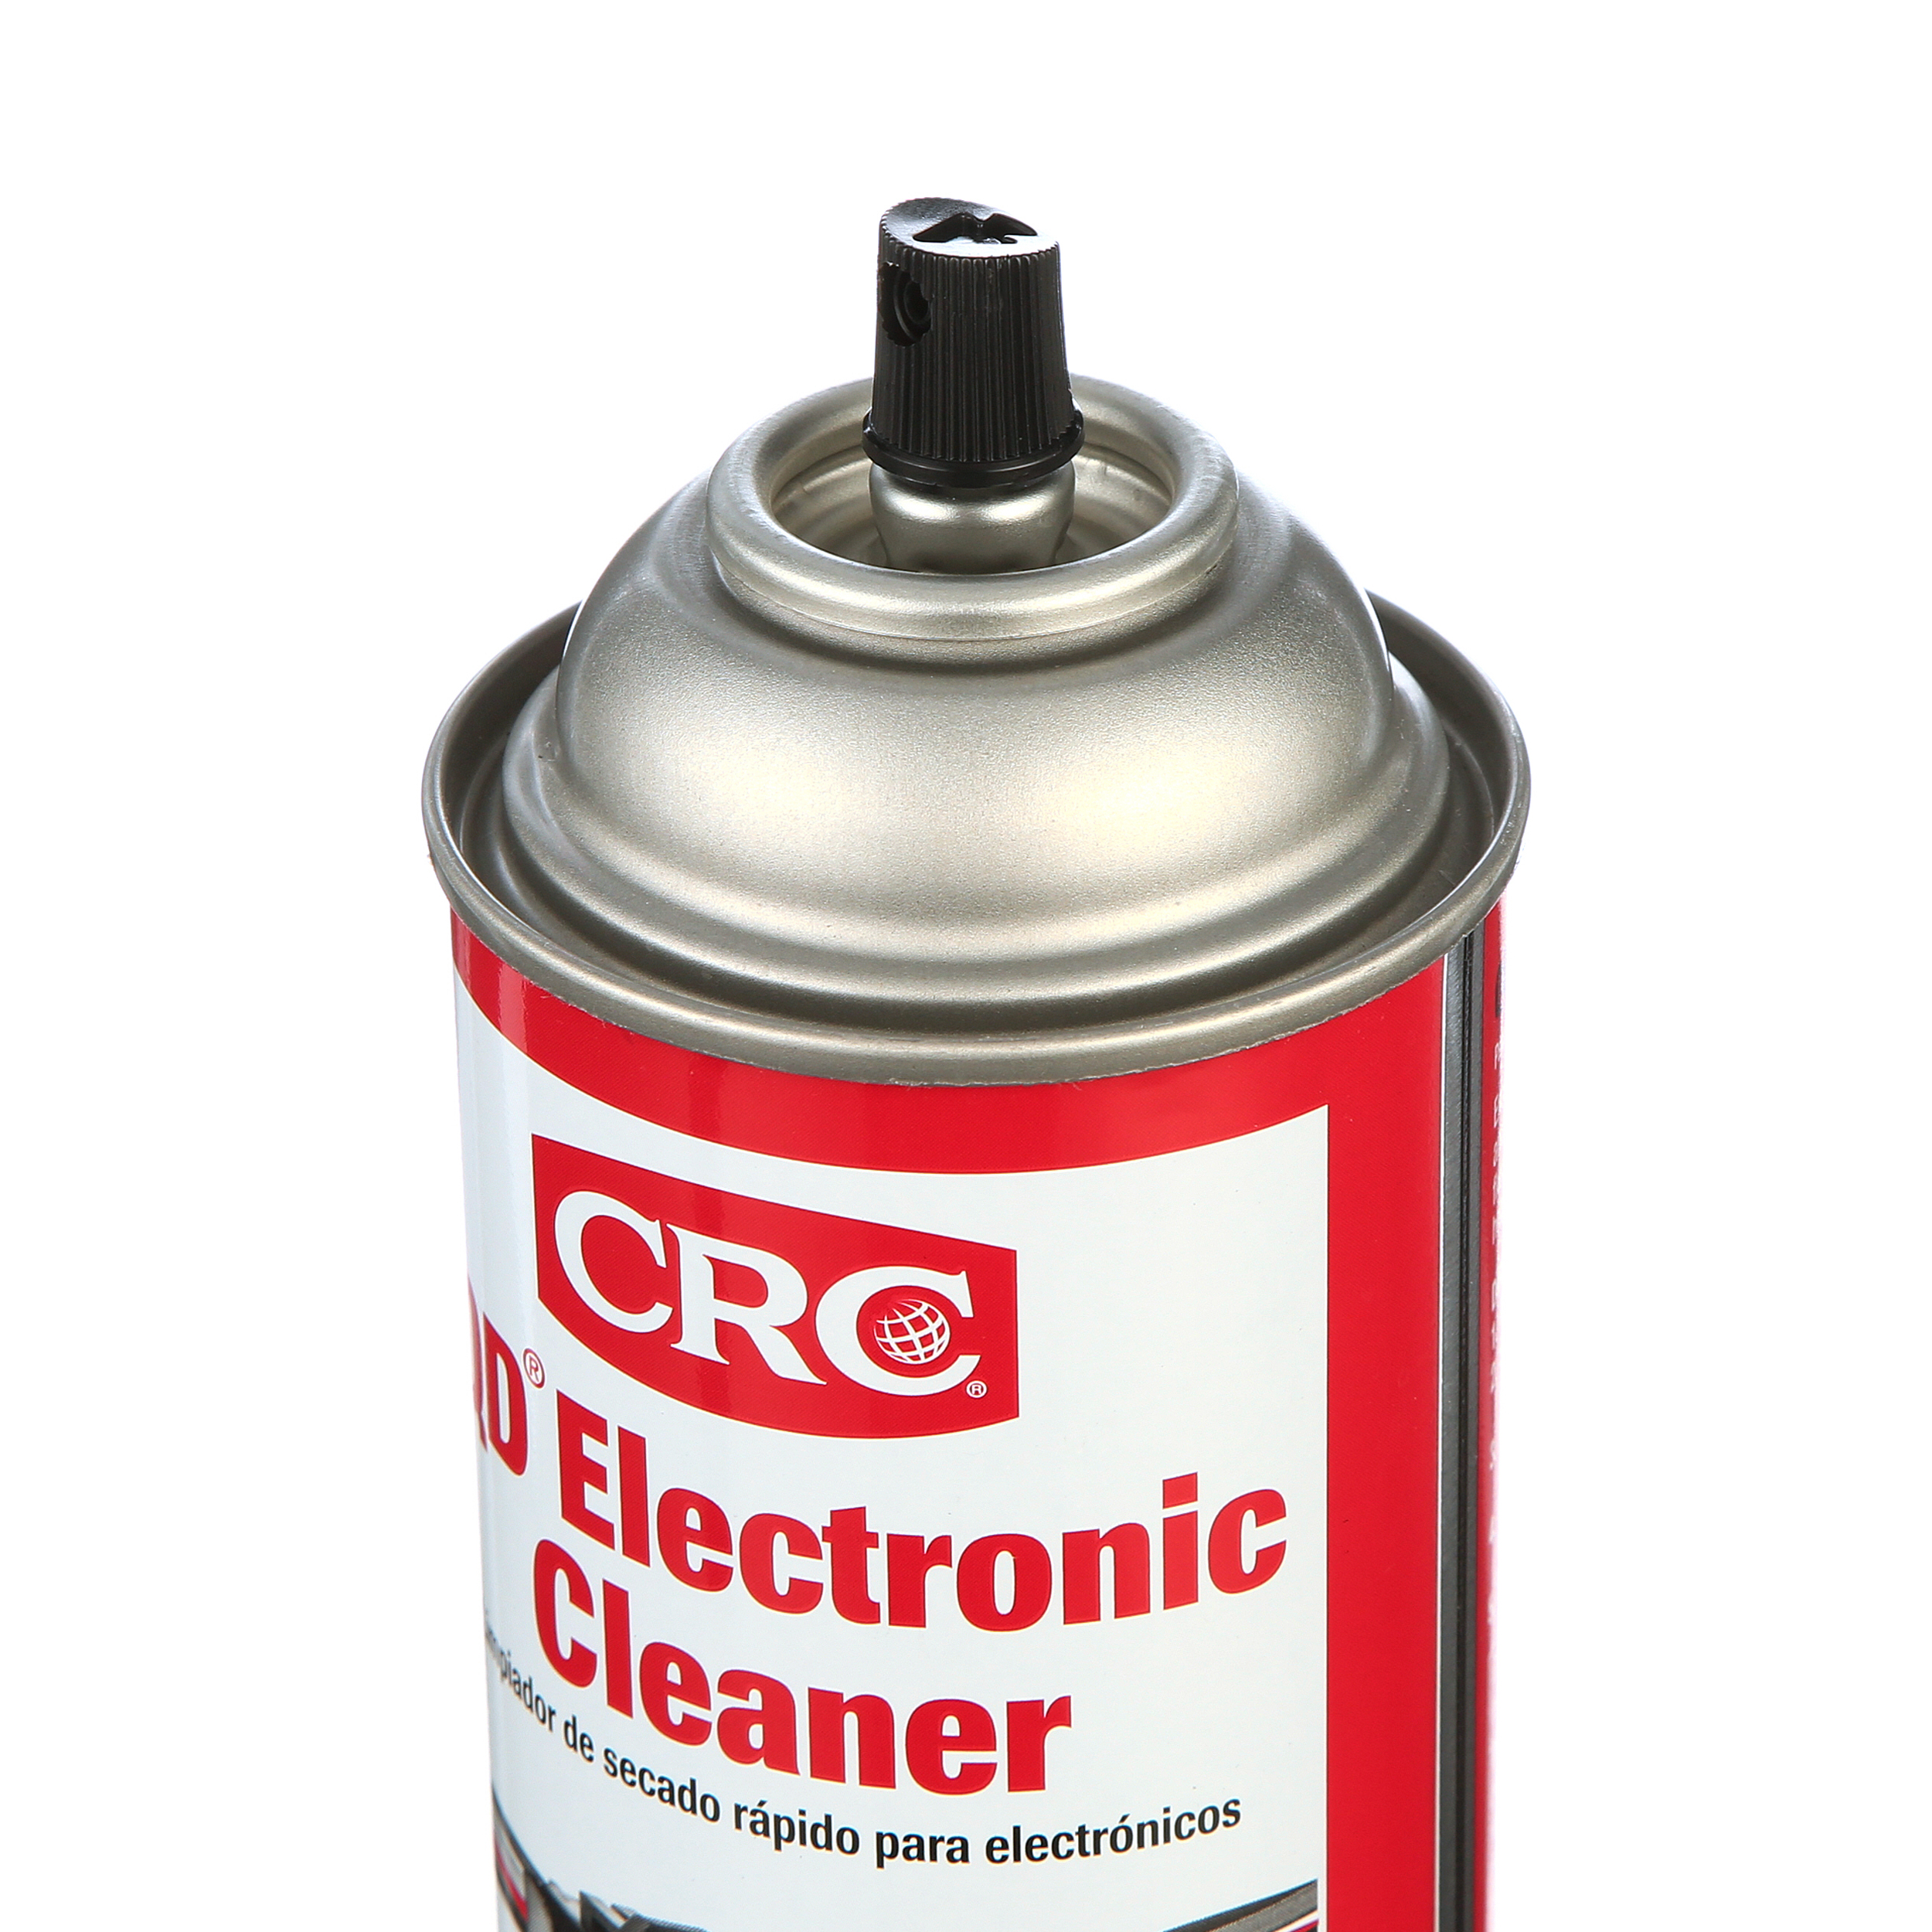 CRC Electronic Cleaner, Quick Dry for Sensitive Electronics, 11 oz - image 4 of 11